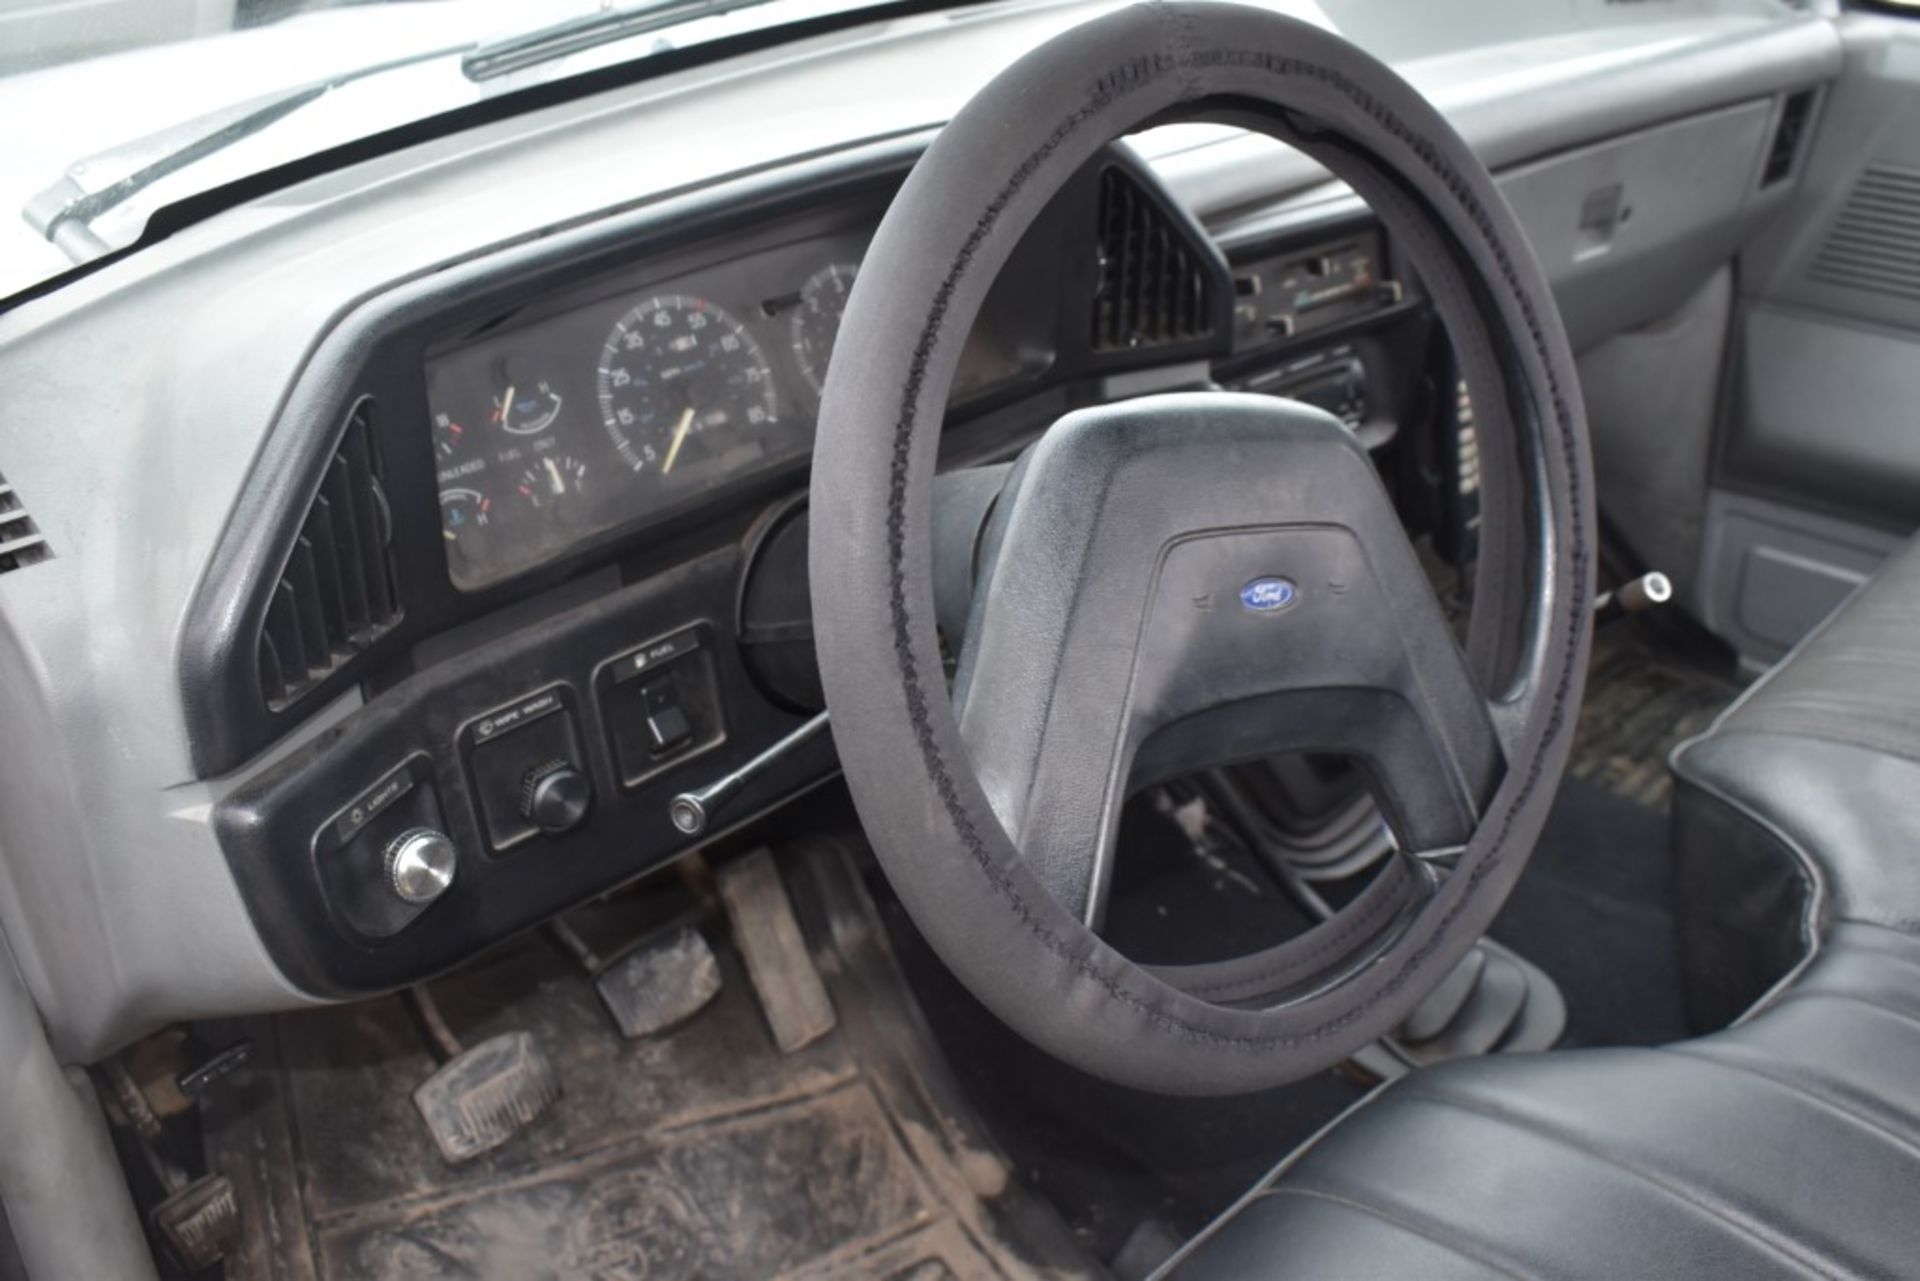 1987 Ford F-150 Truck - Image 32 of 36